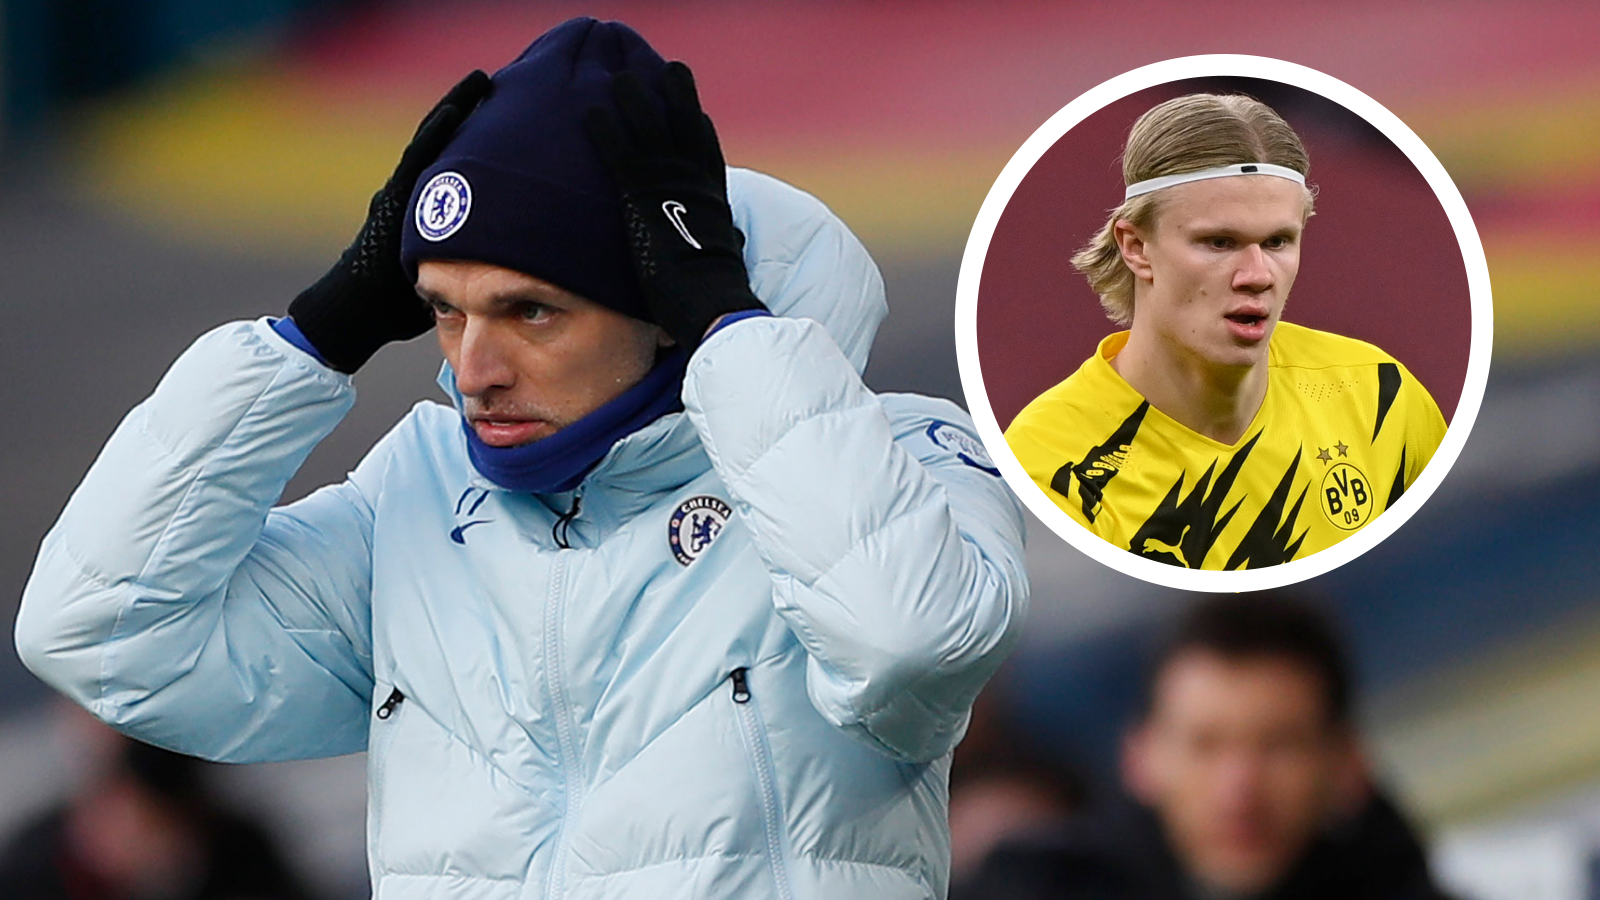 Chelsea boss Tuchel claims he ‘fell into a trap’ in discussing Haaland transfer